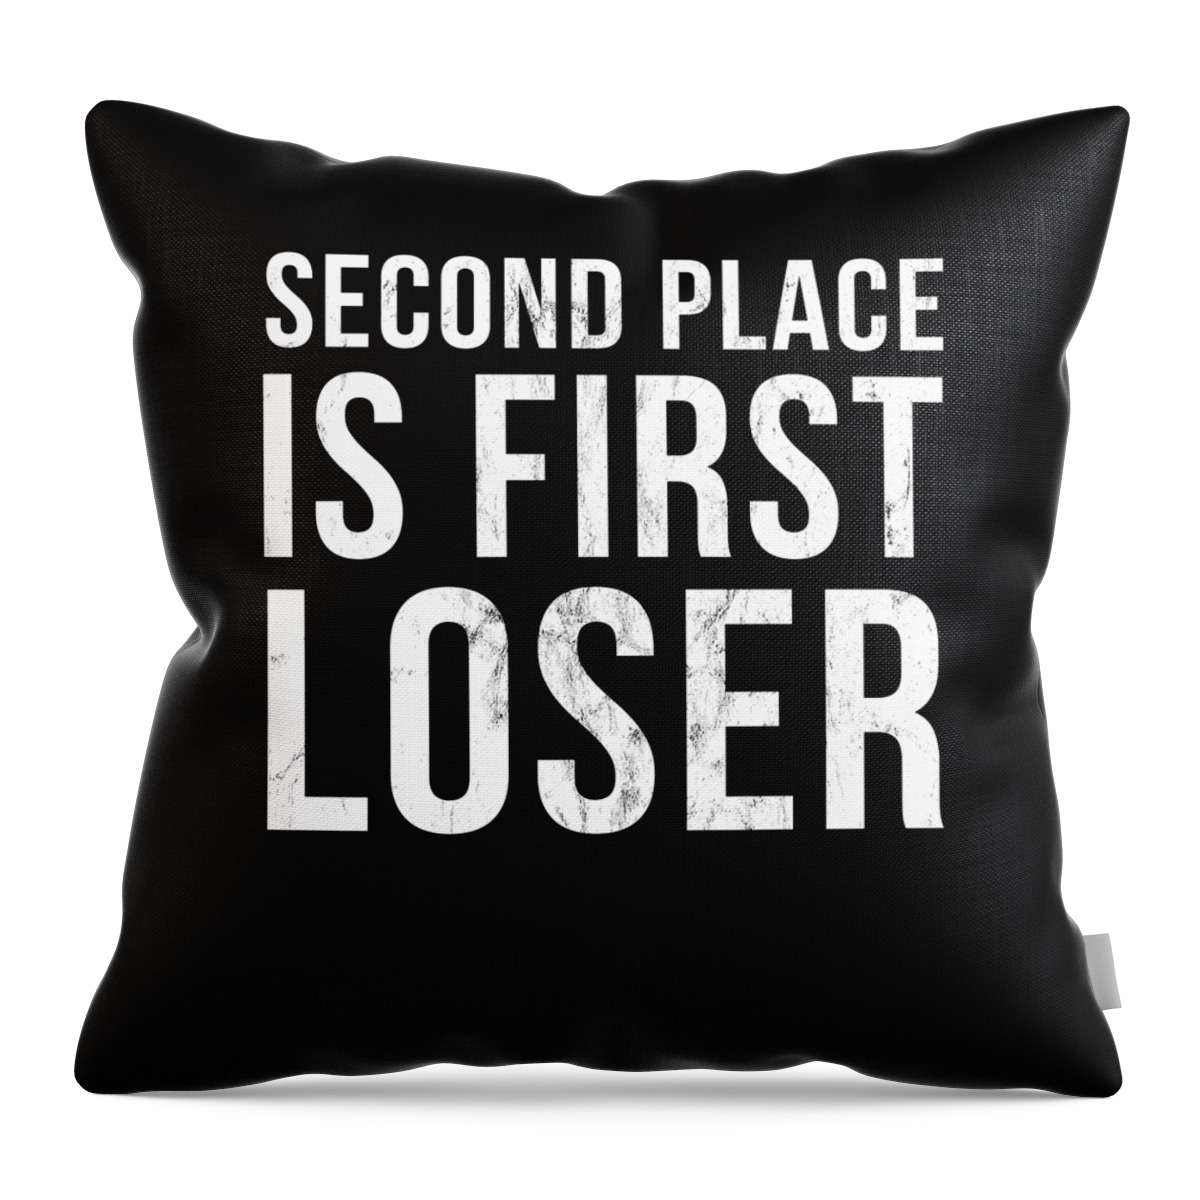 Second Place Is First Loser Funny Designs Throw Pillow by Noirty Designs -  Fine Art America